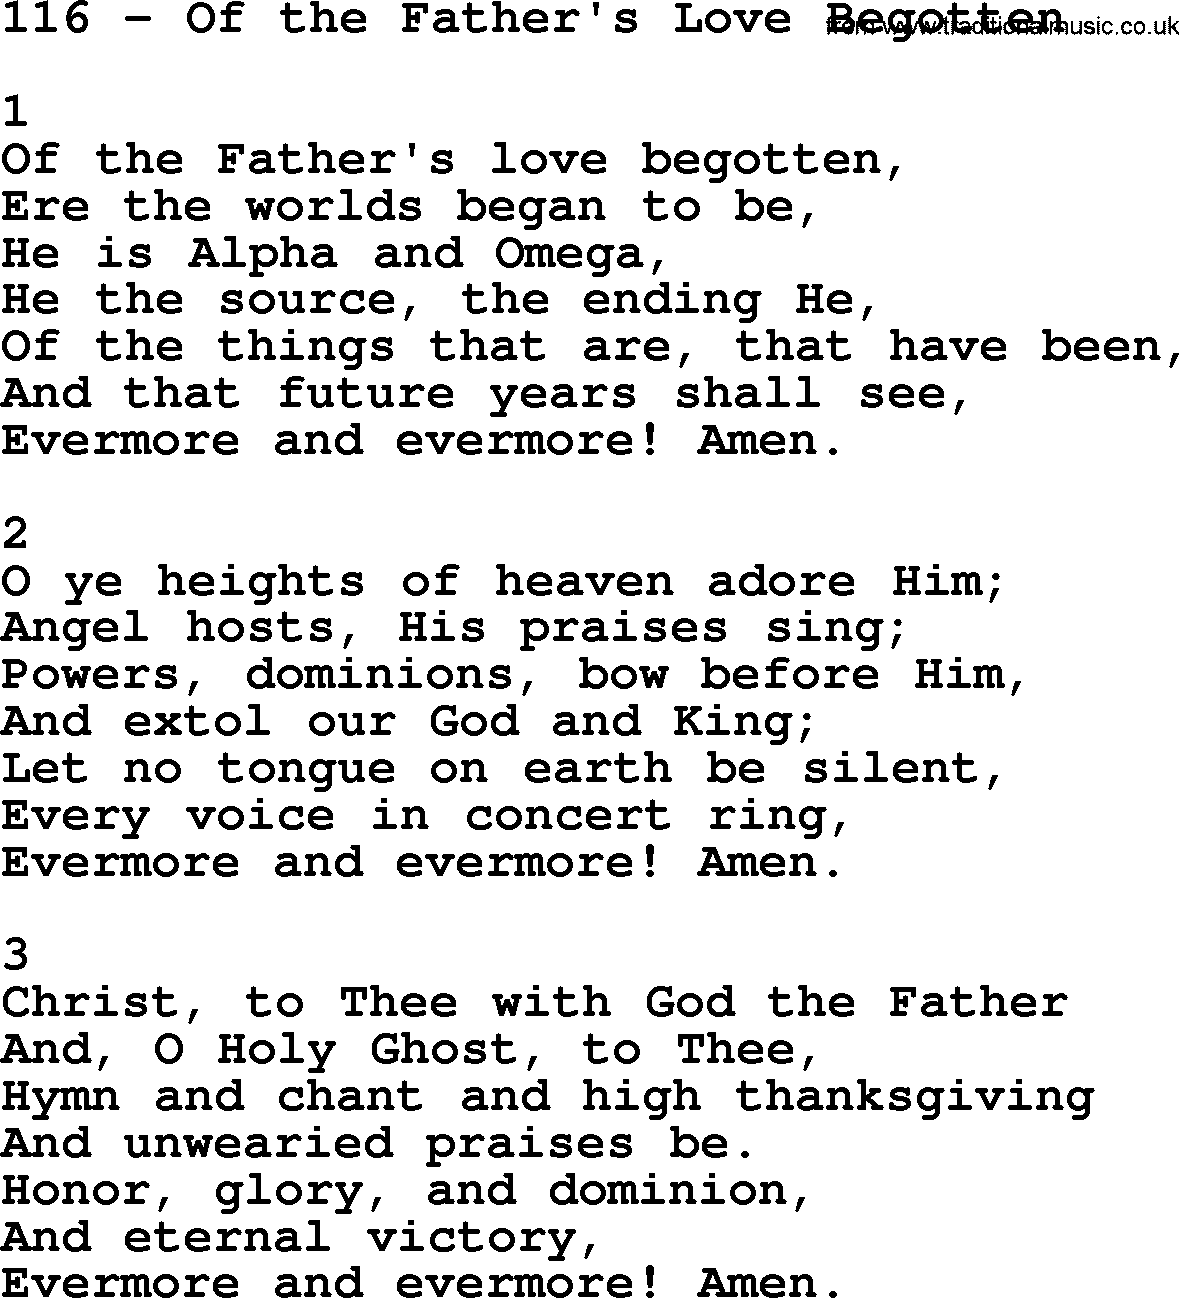 Complete Adventis Hymnal, title: 116-Of The Father's Love Begotten, with lyrics, midi, mp3, powerpoints(PPT) and PDF,